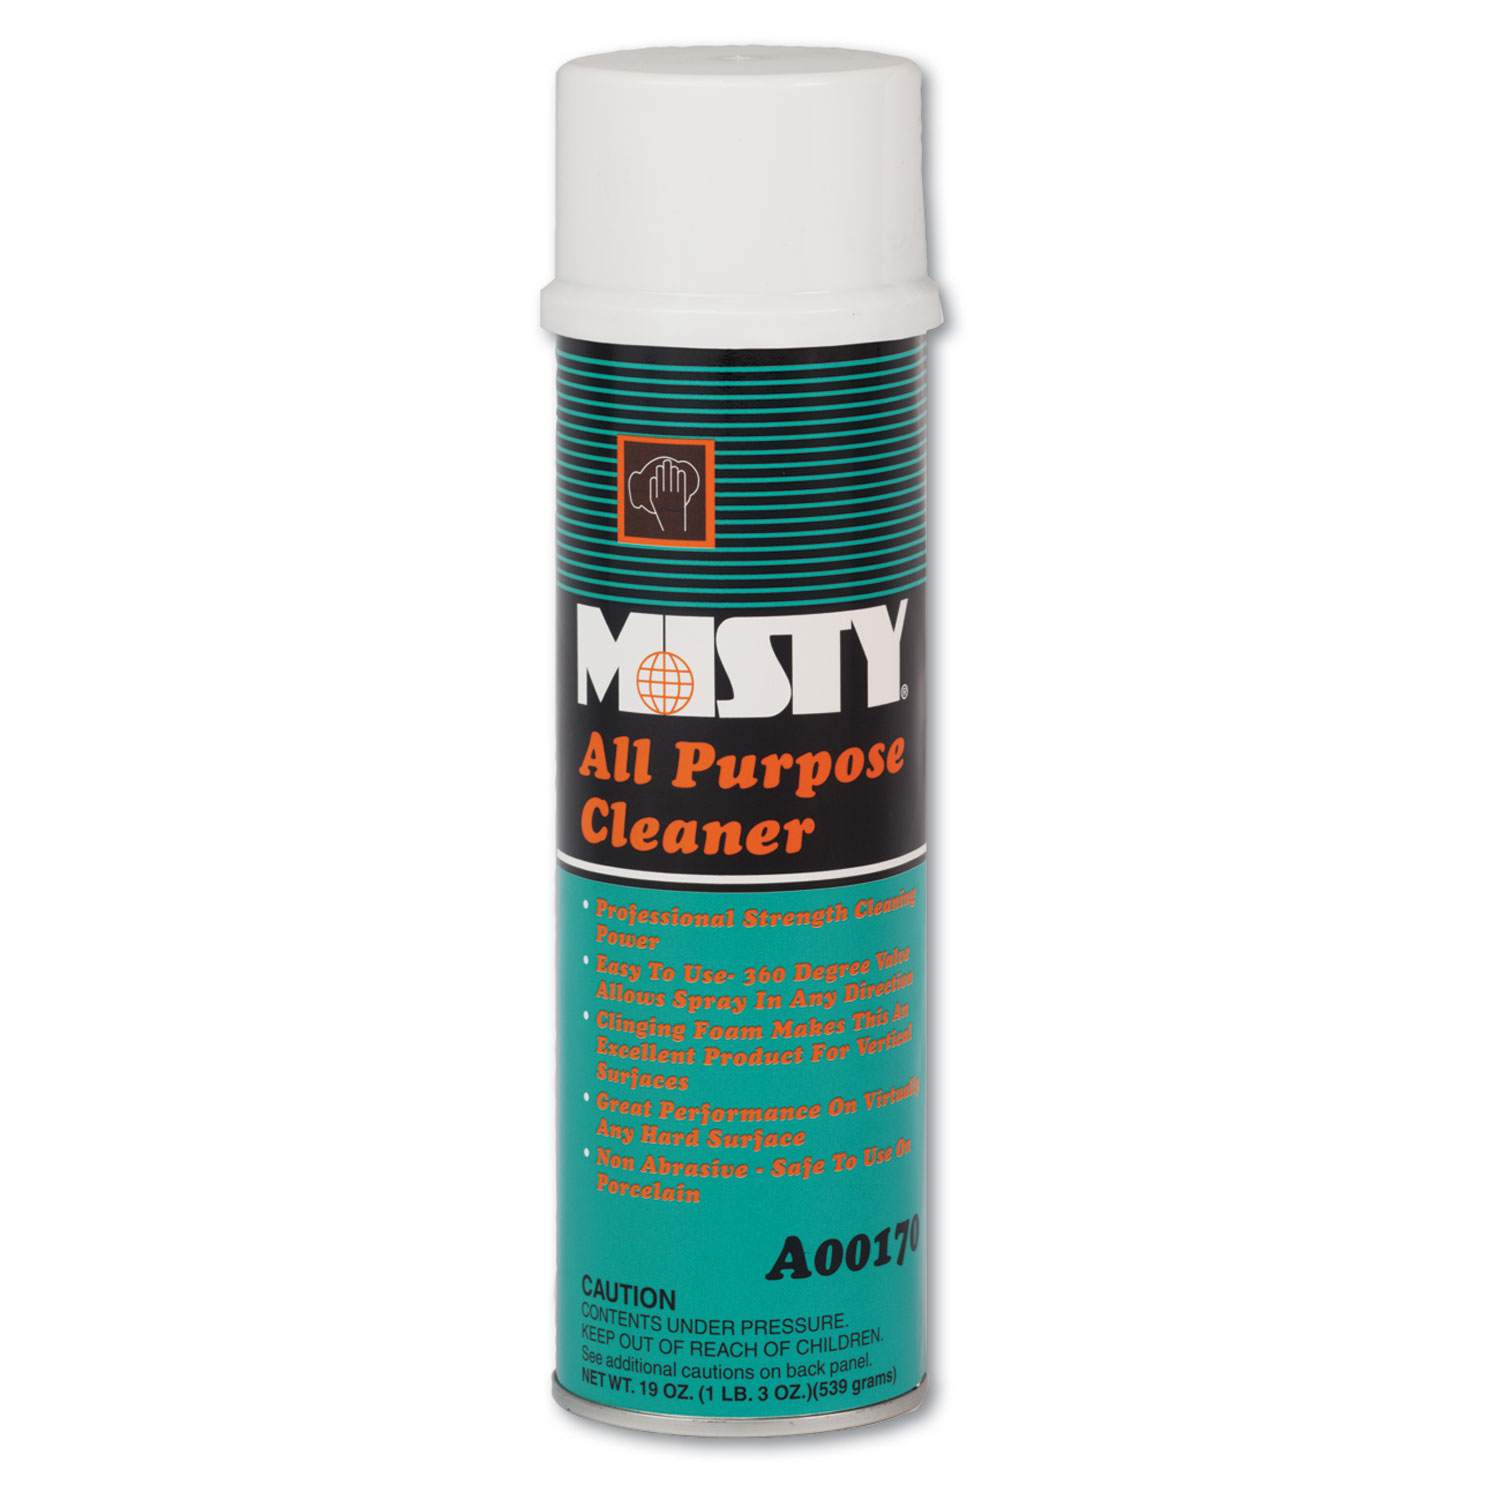 Misty All-Purpose Cleaner, Mint Scent, 19 oz. Aerosol Can - BuyDirect